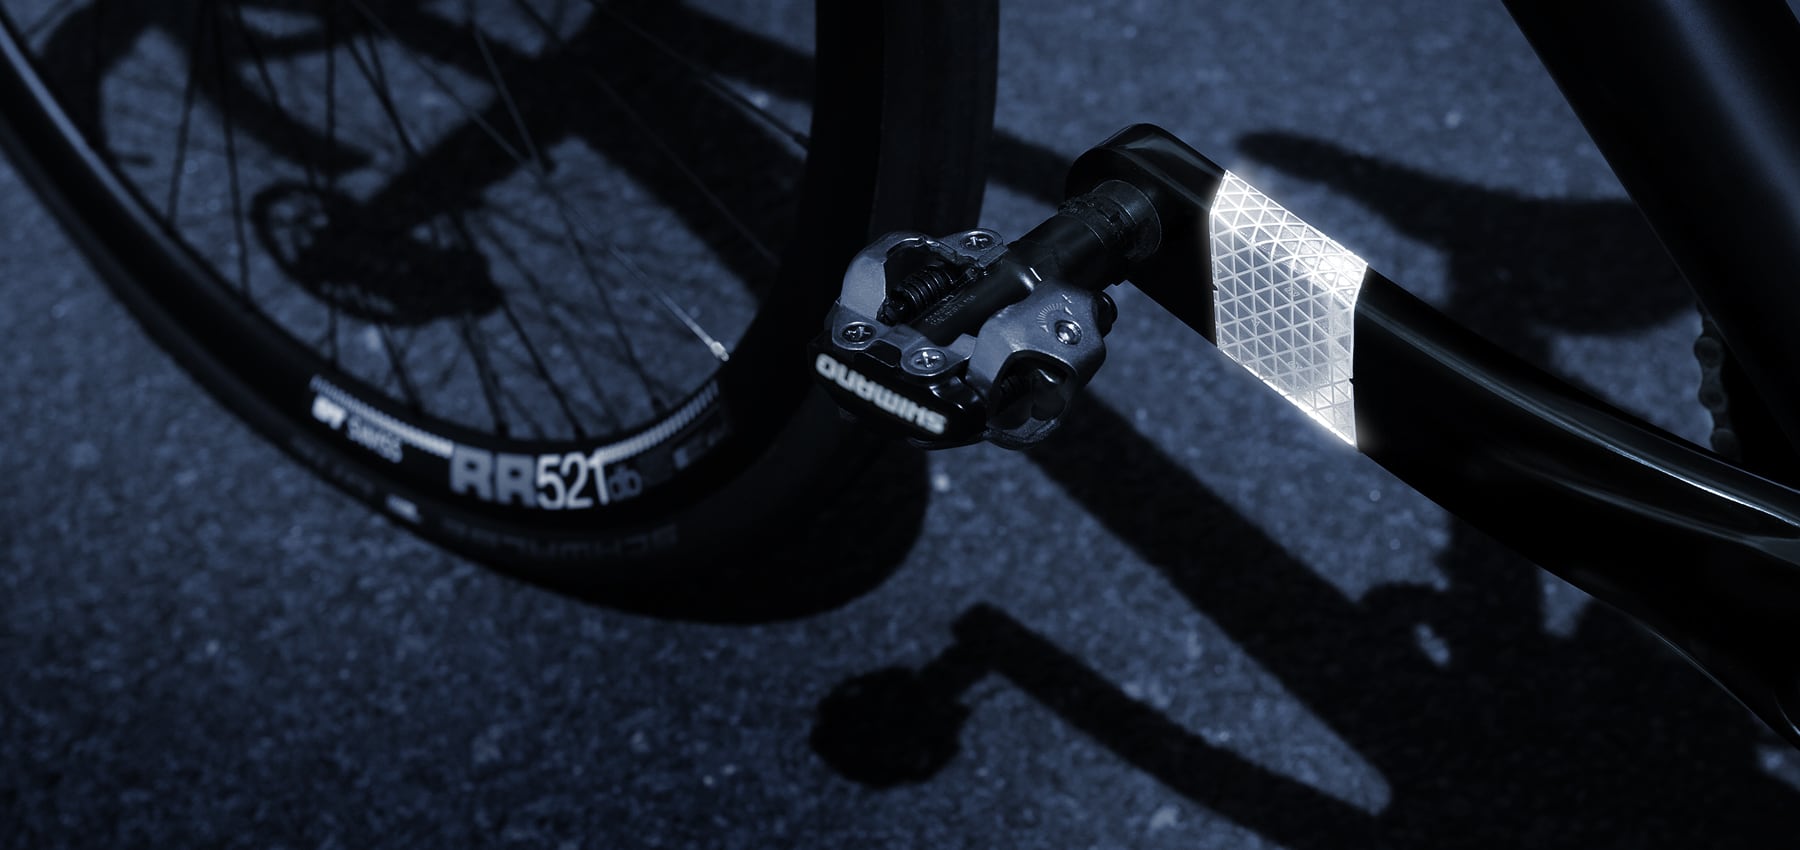 FLECTR VORTEX - pedal reflector substitute for road bikes